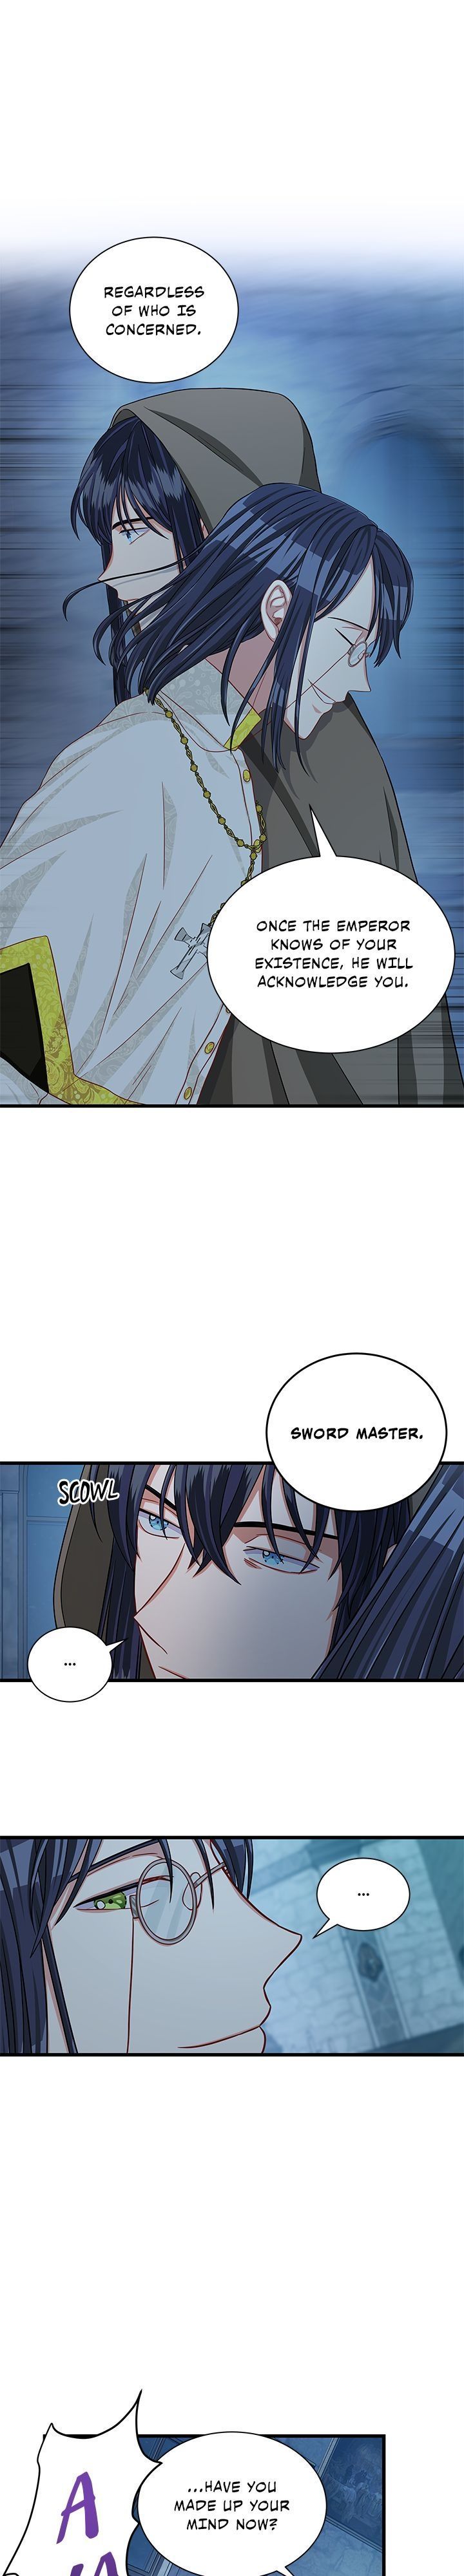 Priscilla's Marriage Request Chapter 89 page 5